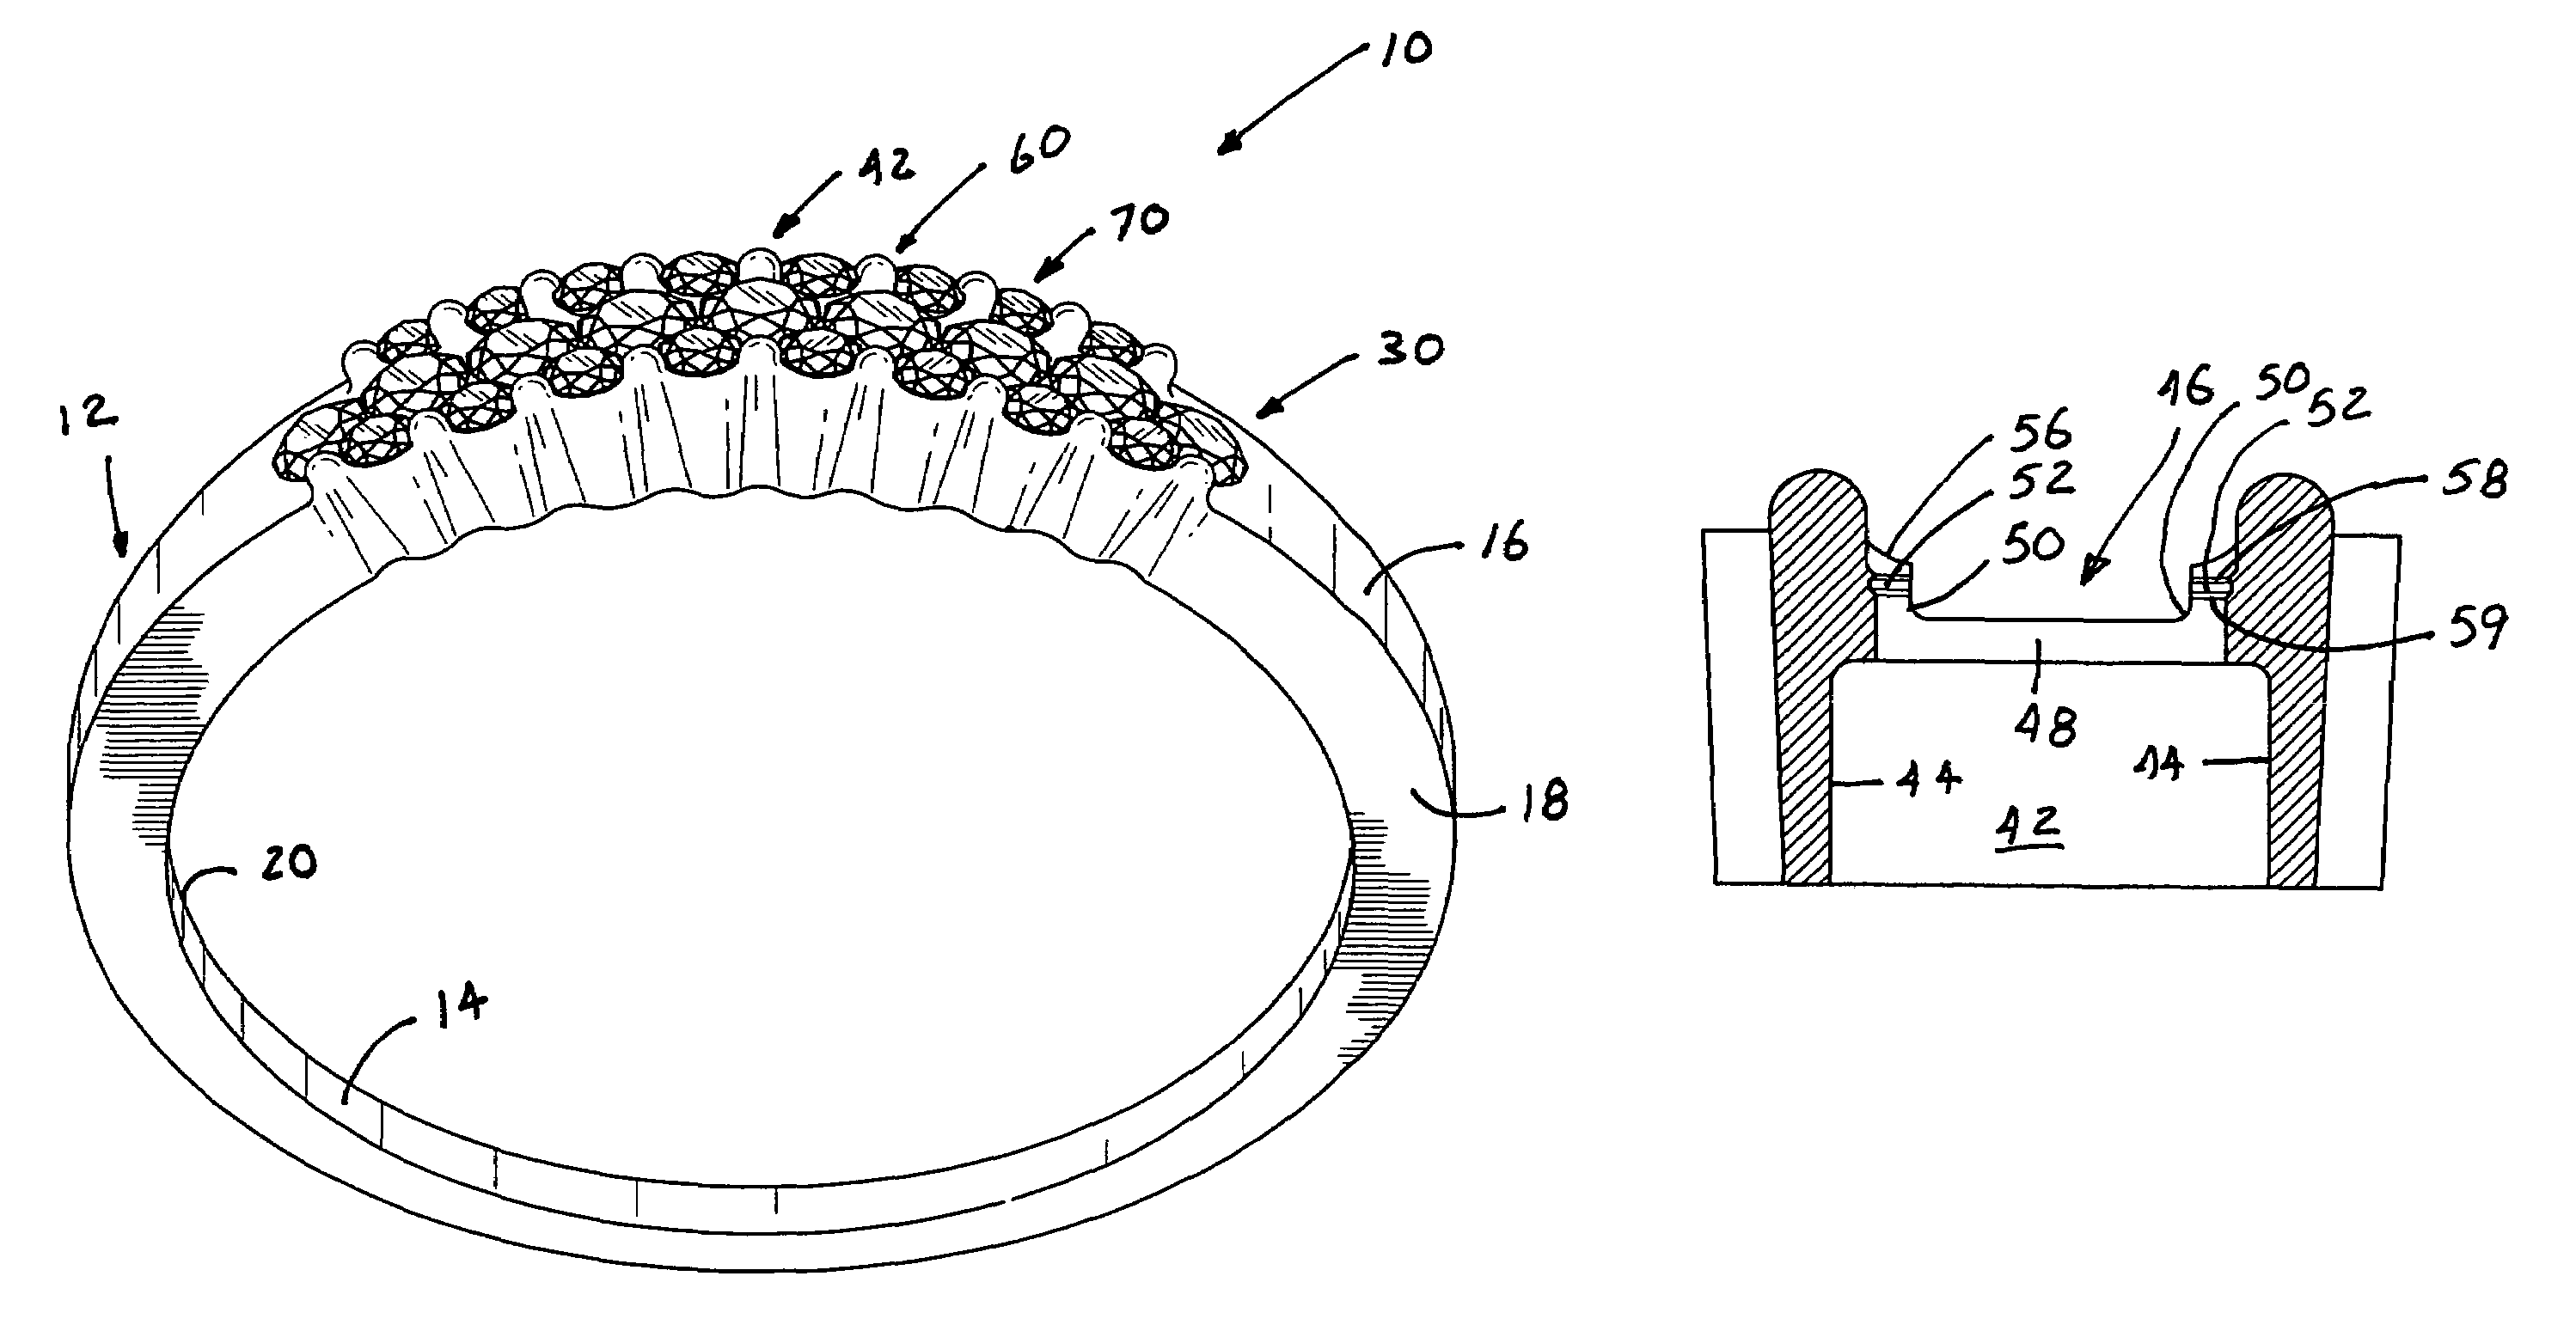 Jewelry article utilizing a linear stone setting